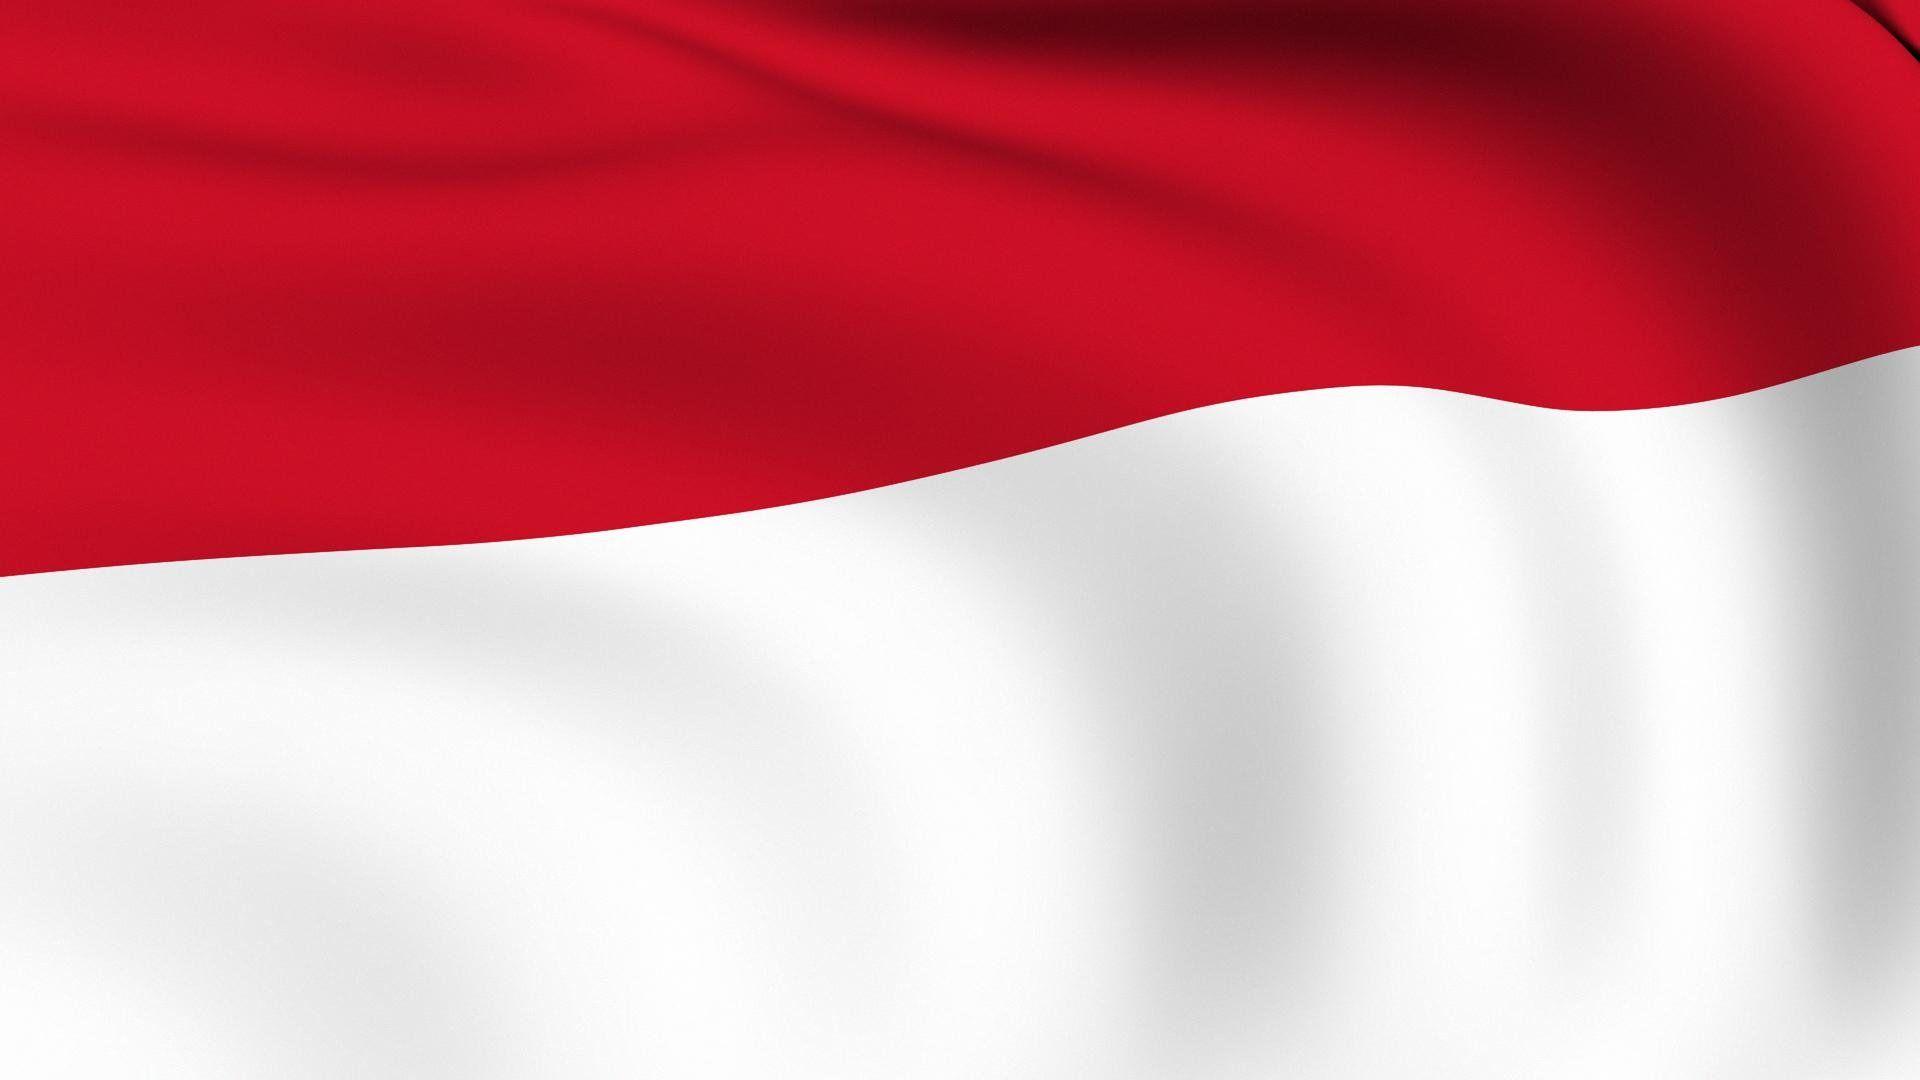 Indonesia Flag Wallpapers - Wallpaper Cave